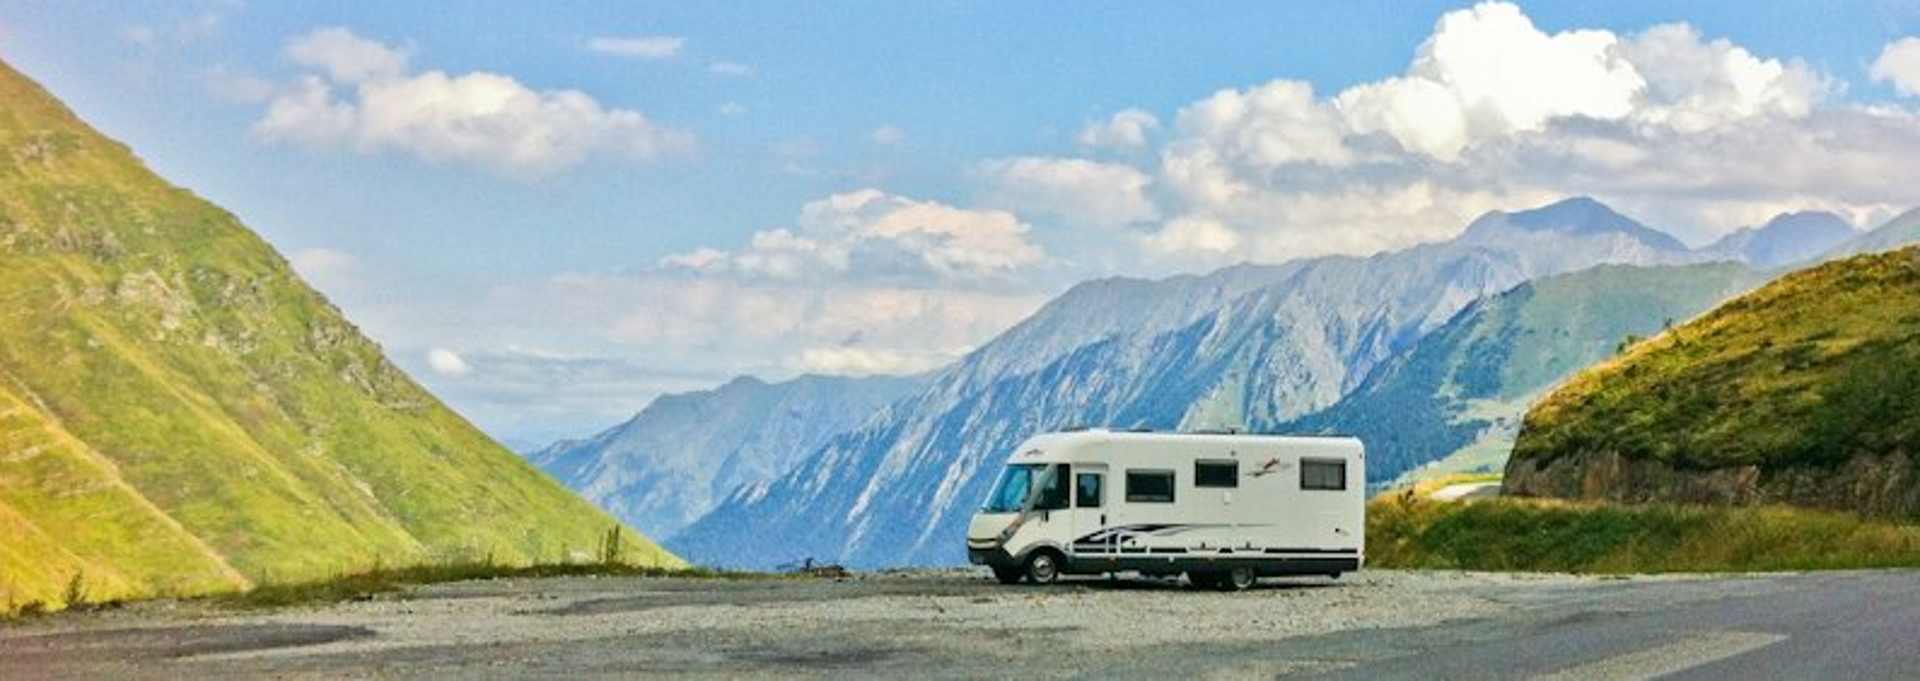 <a href="https://www.clubmotorhome.co.uk/motorhome-stopovers">Motorhome Stopovers and Wildcamping Locations</a>